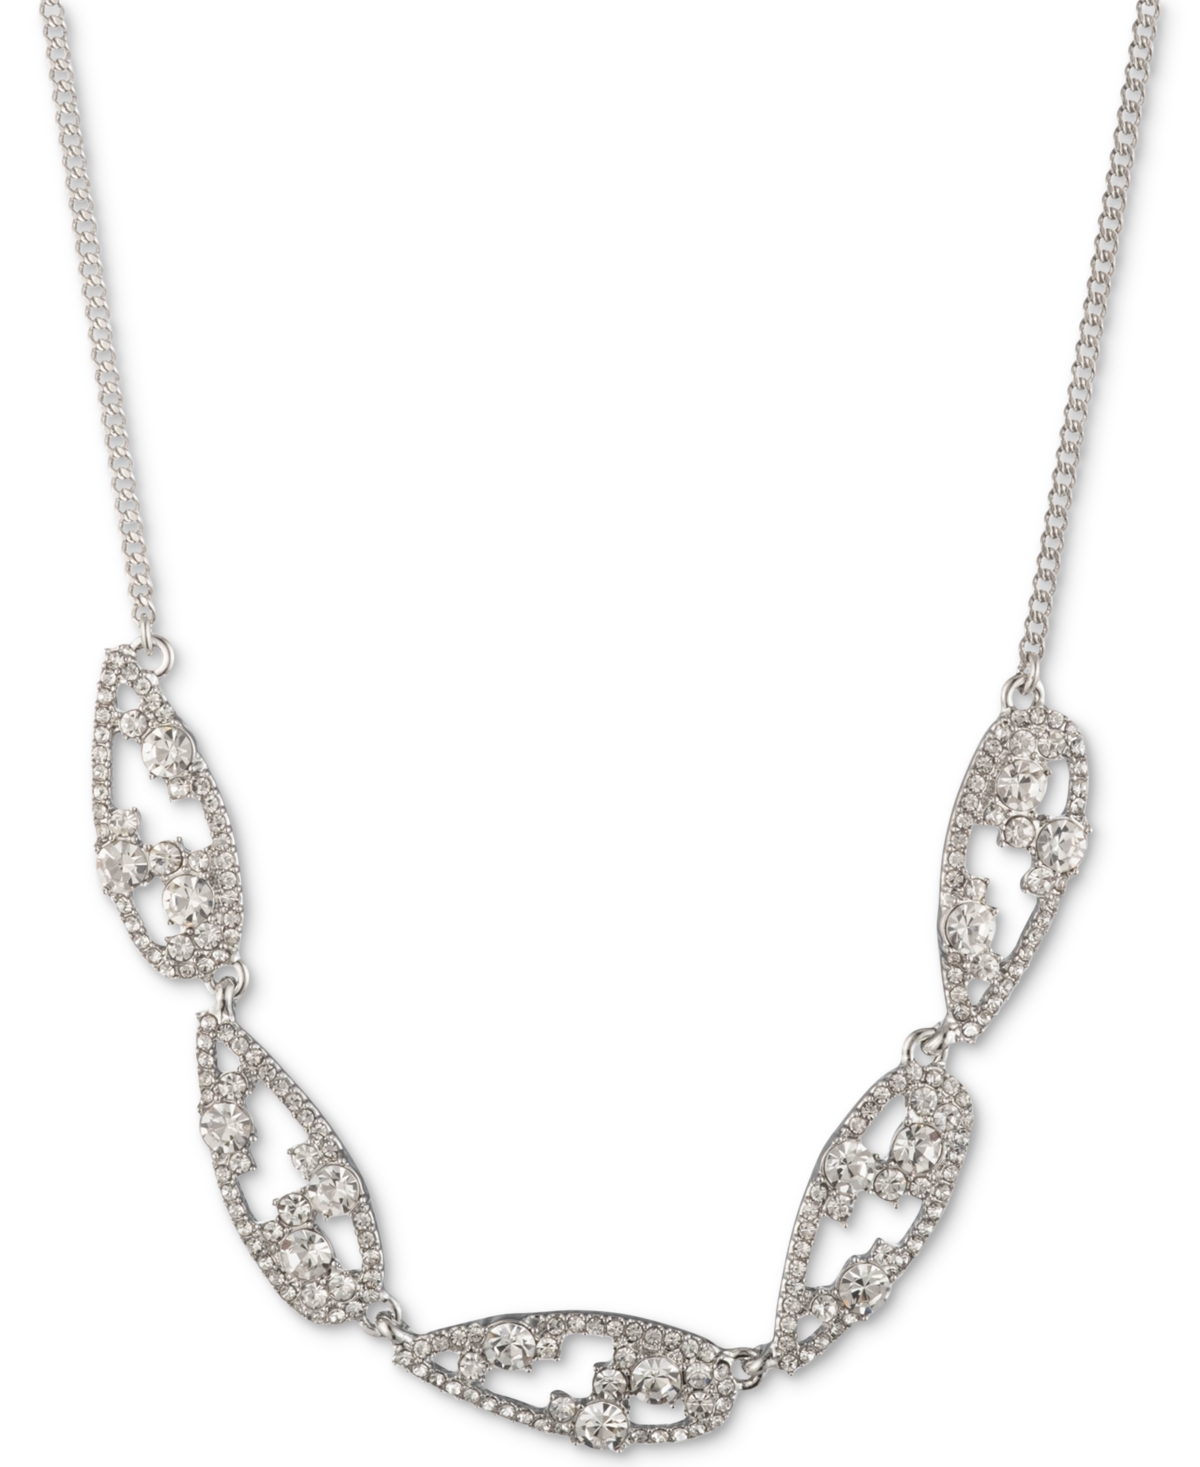 Givenchy Silver-Tone Crystal Pear-Shape Statement Necklace, 16" + 3" extender